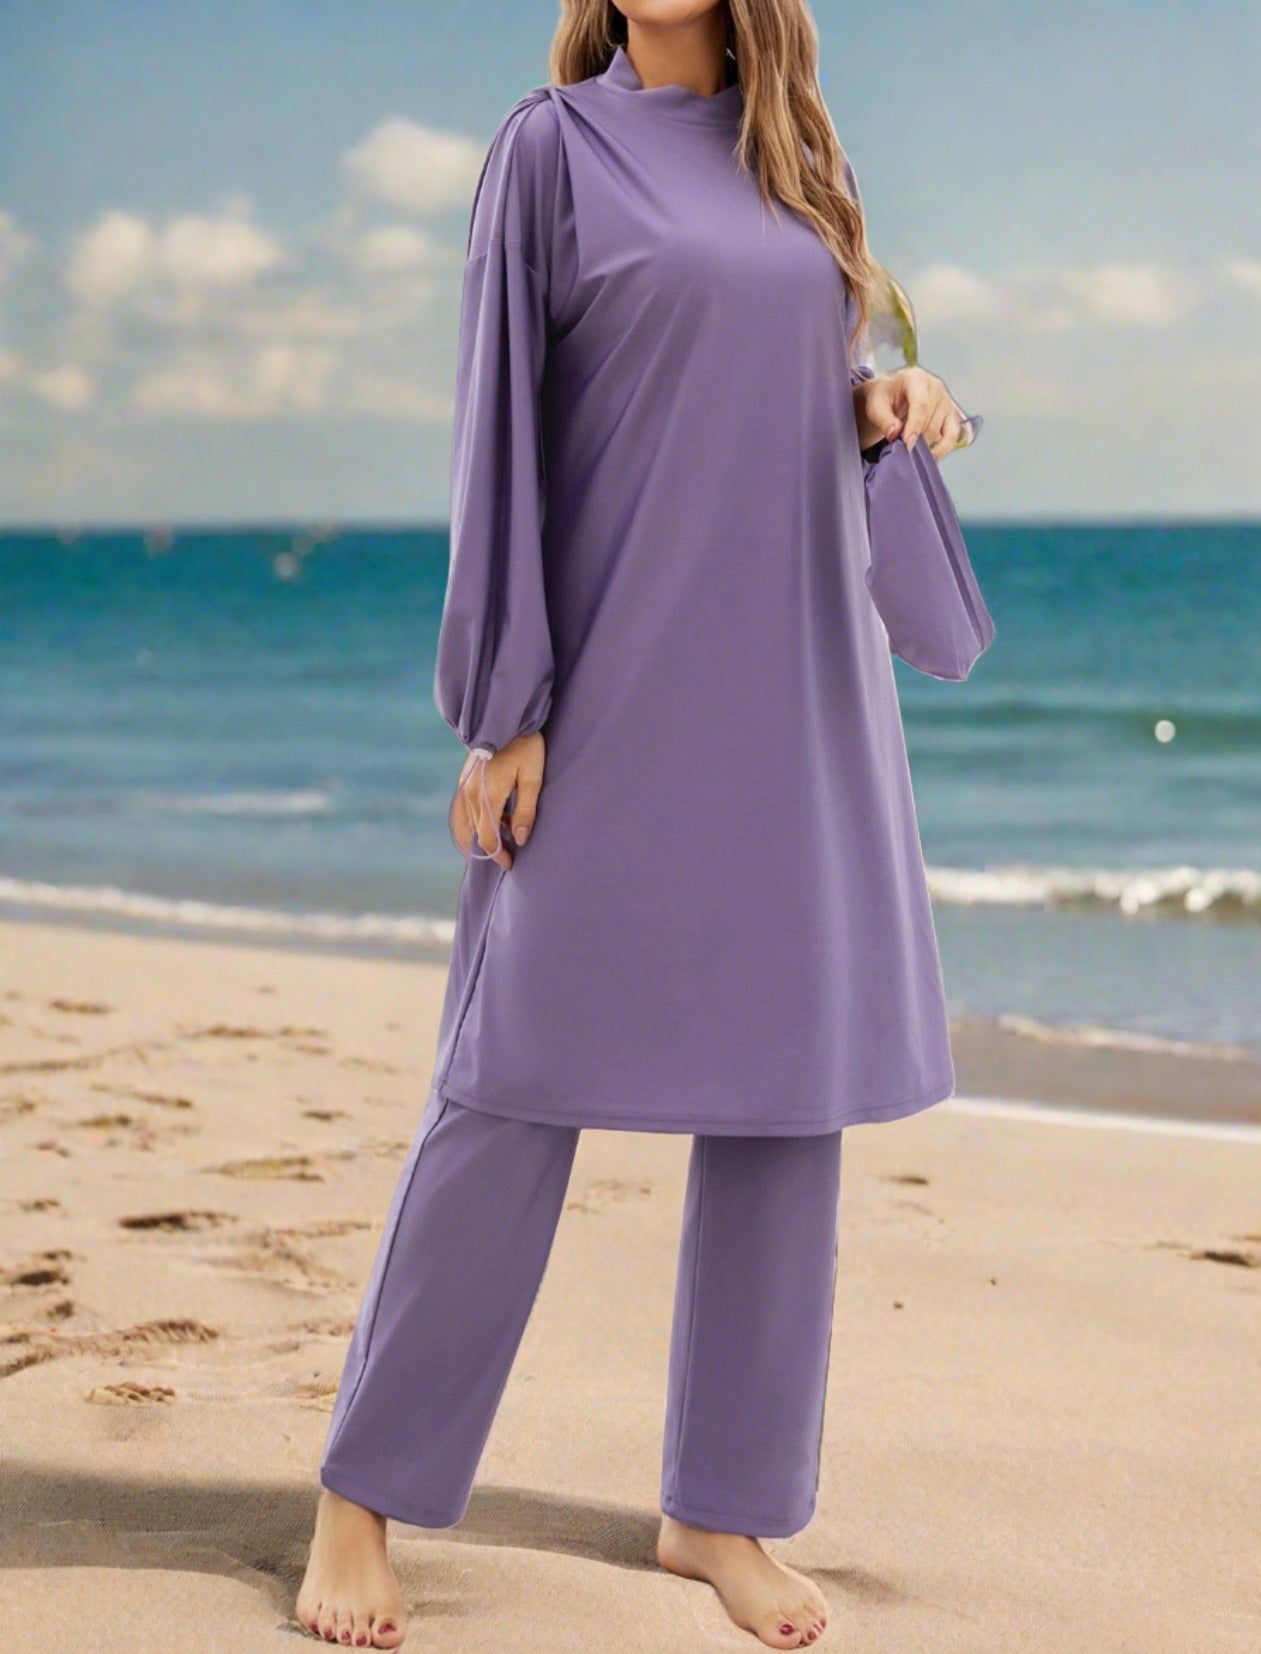 Full coverage 2 PC modest swimsuit - Try Modest Limited 